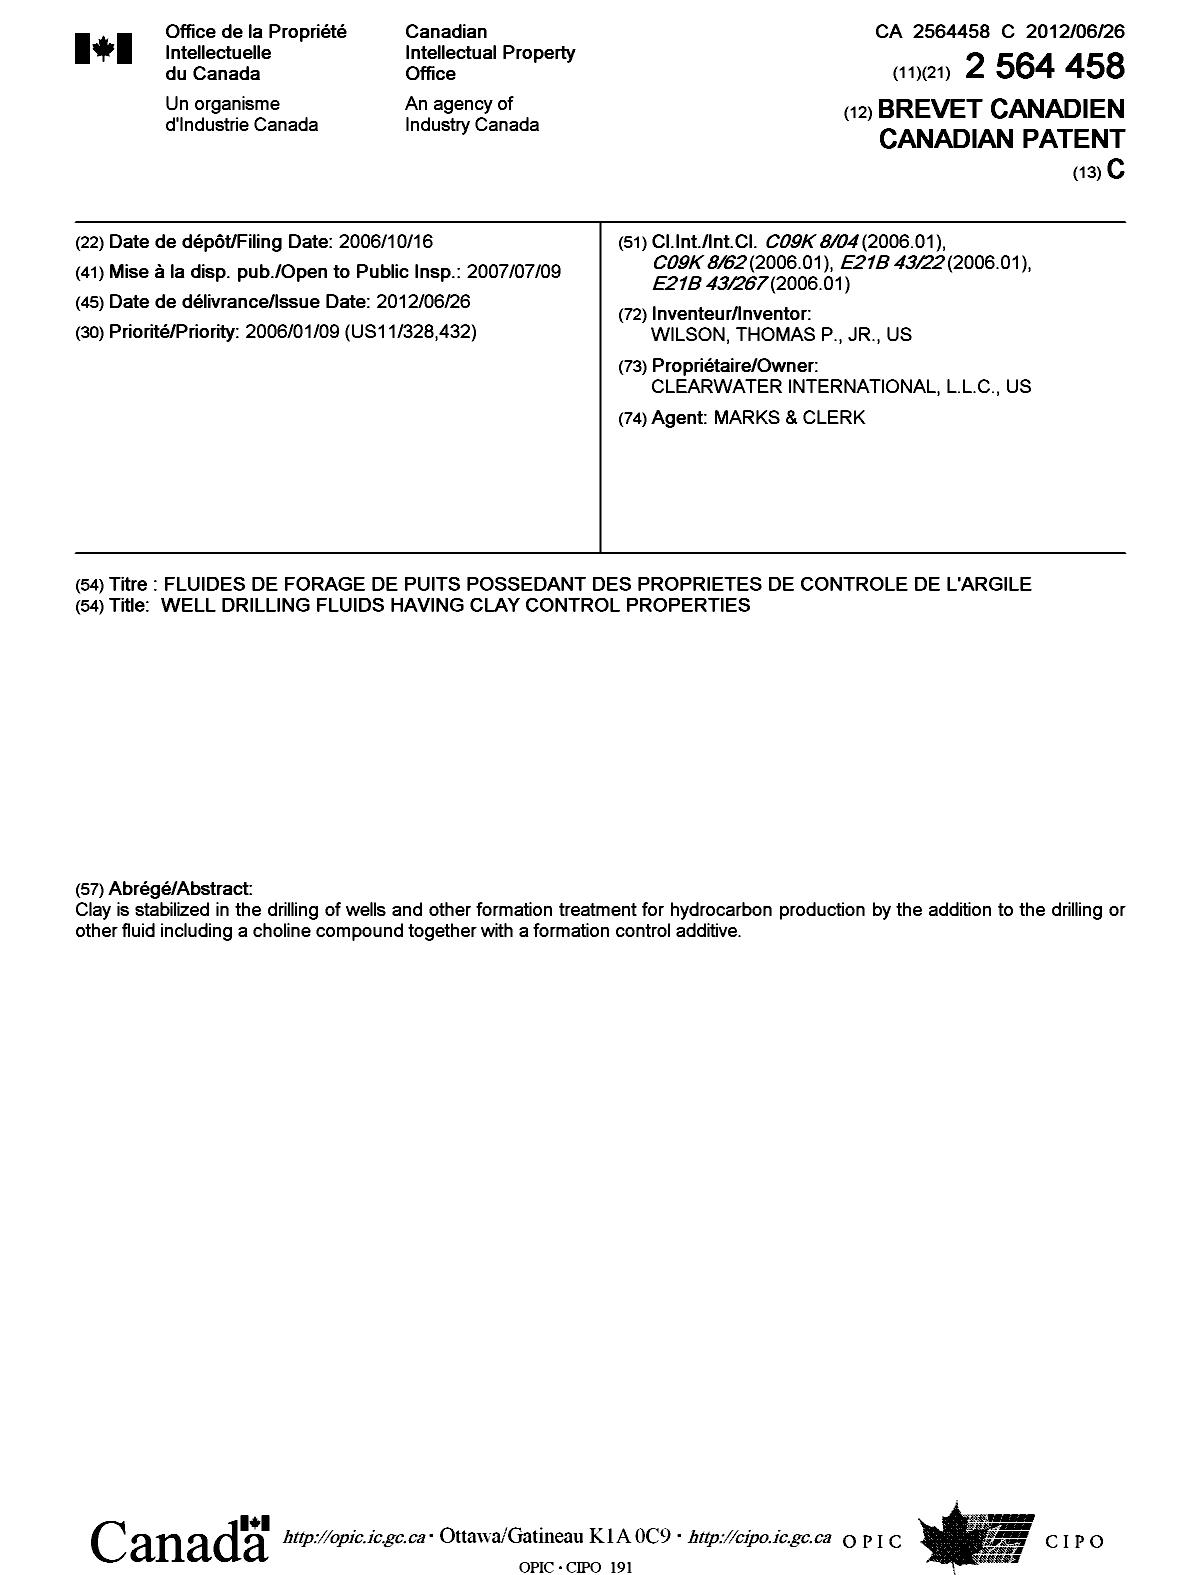 Canadian Patent Document 2564458. Cover Page 20120529. Image 1 of 1